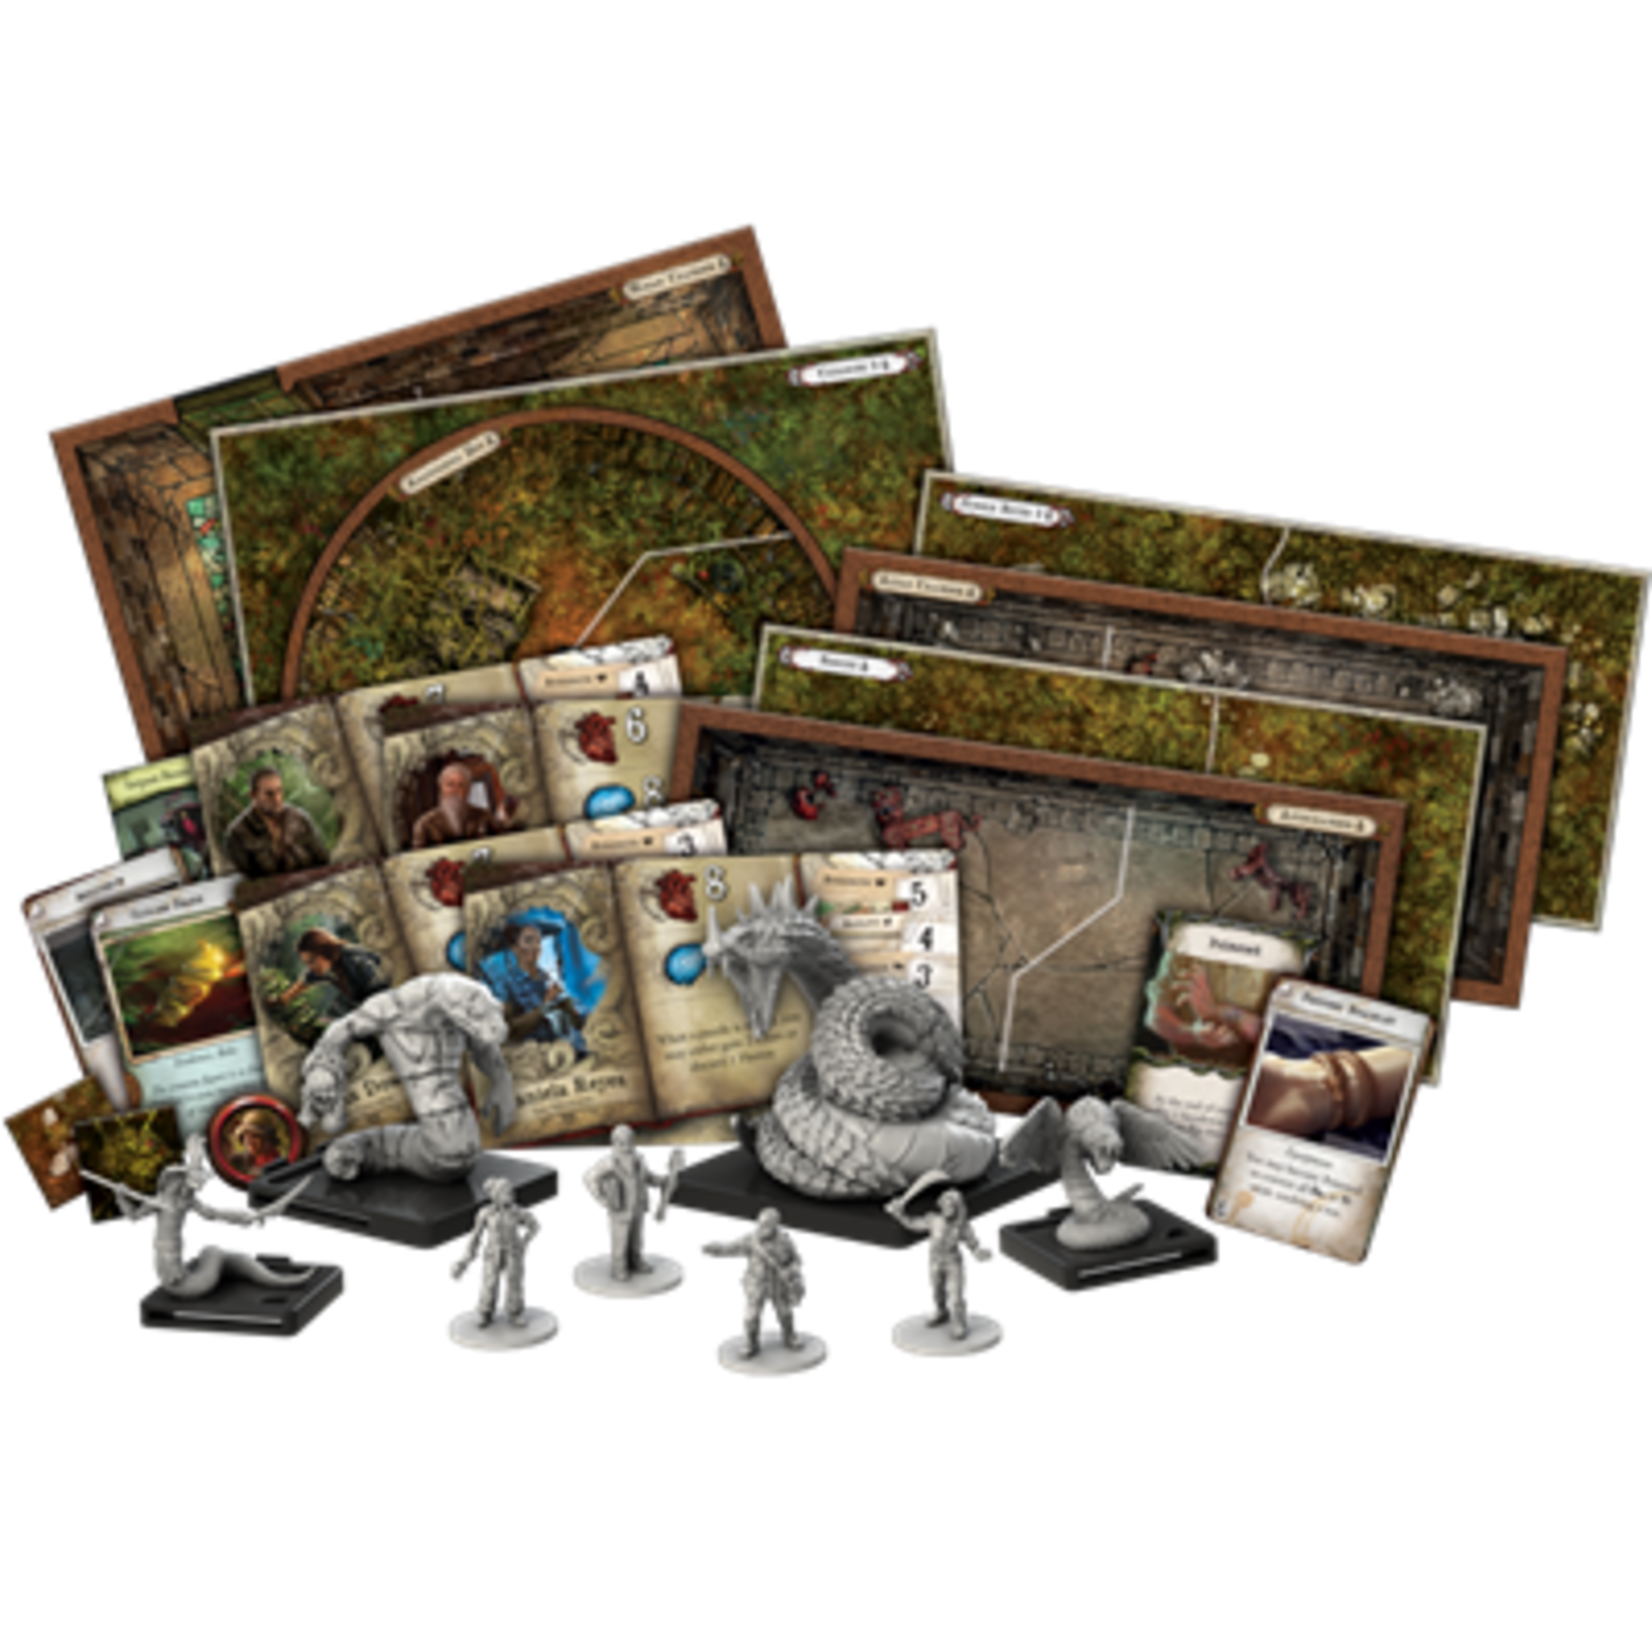 Fantasy Flight Games Mansions of Madness: Path of the Serpent (EN)